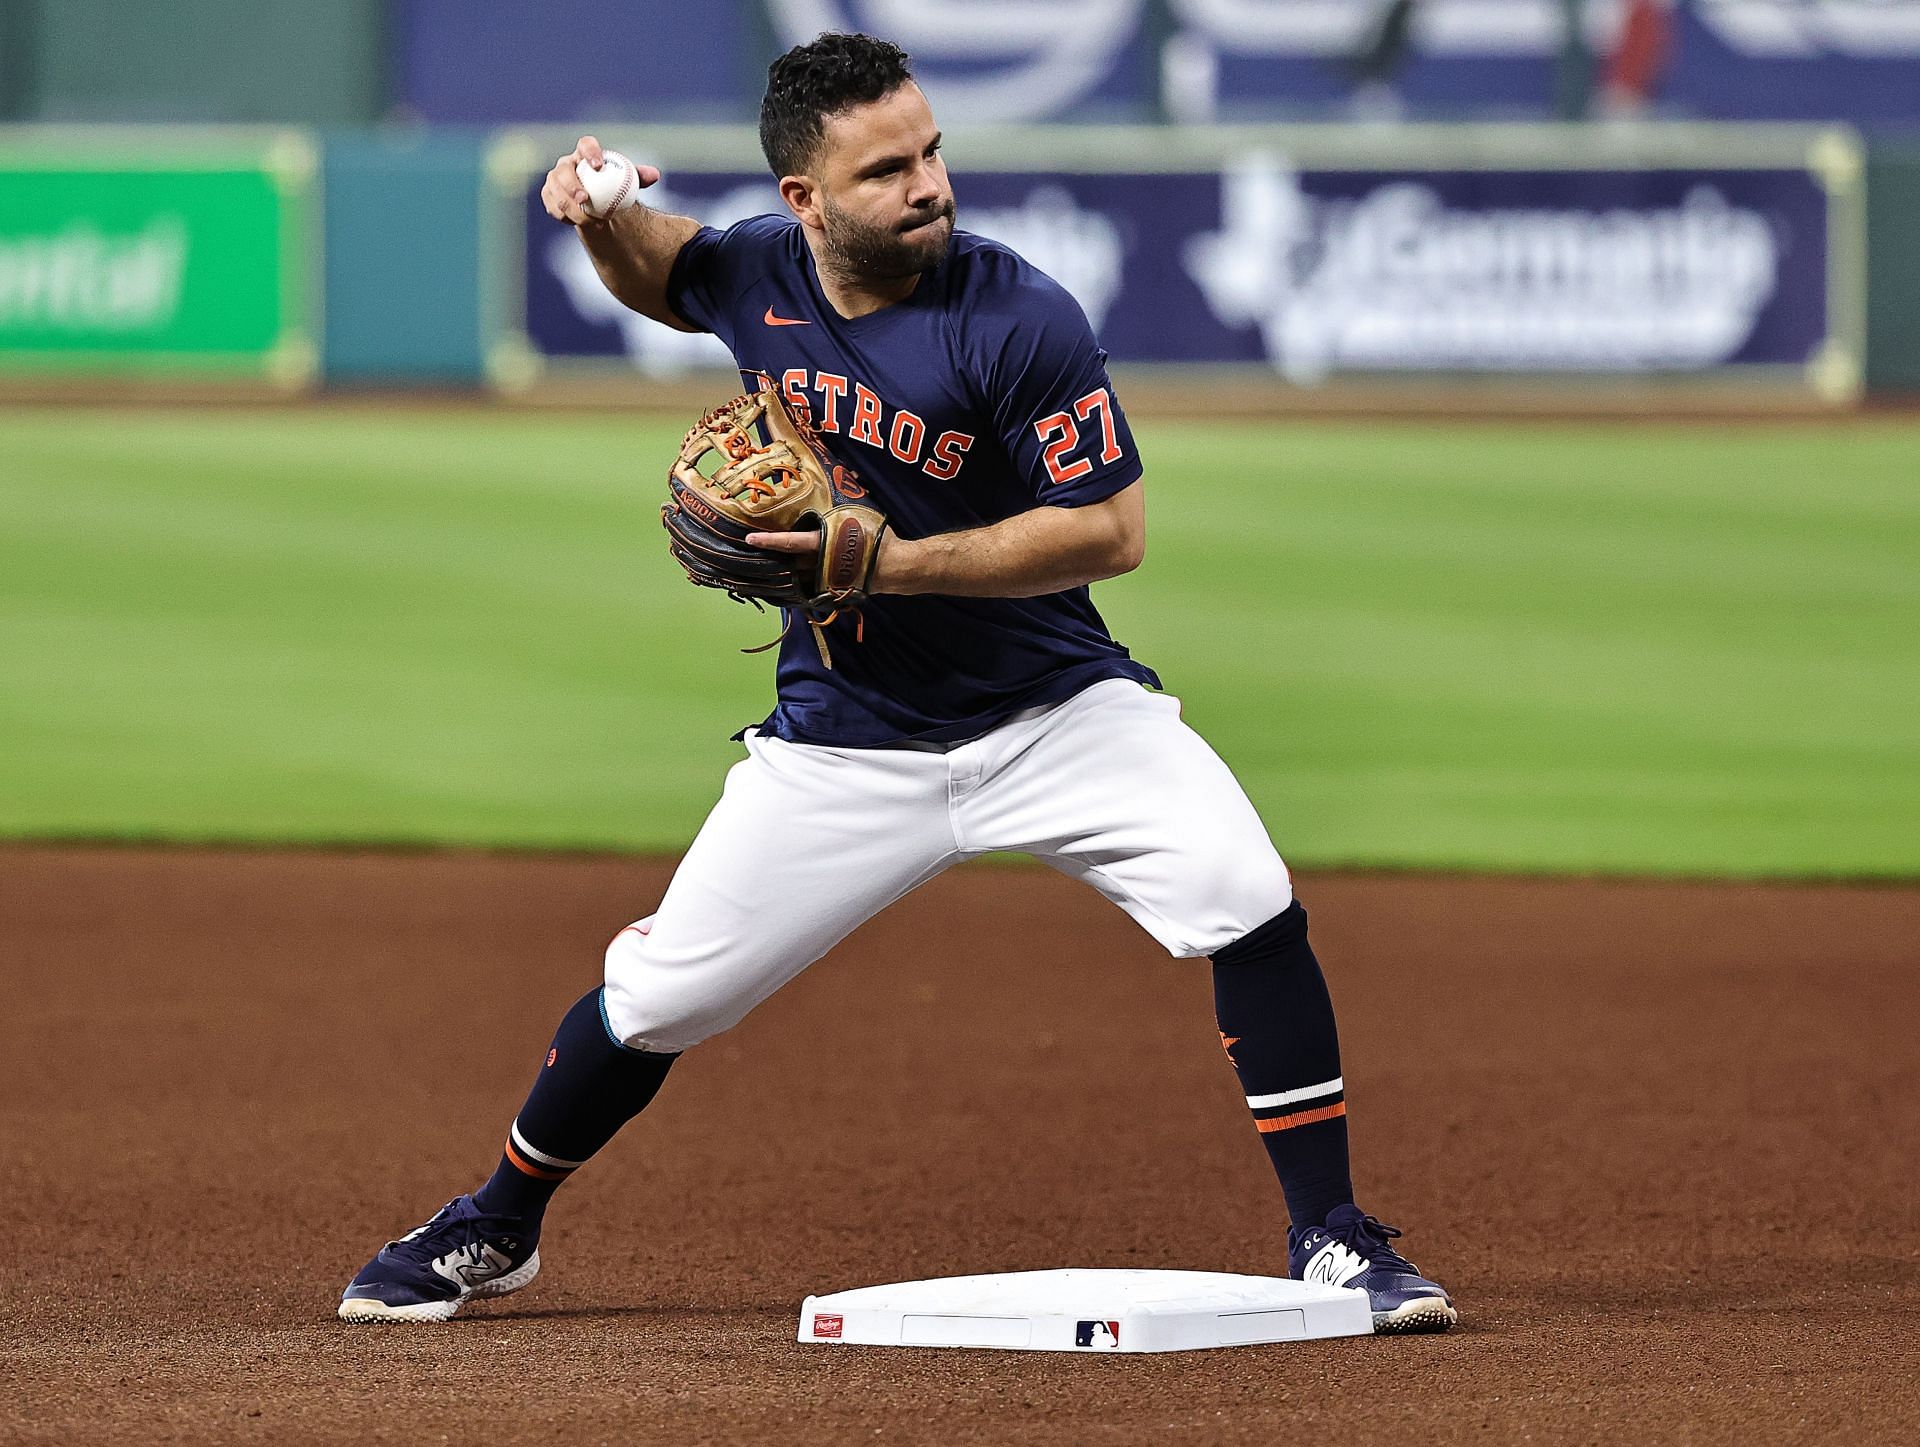 Jose Altuve, or an Impostor Who Looks Just Like Him, Is Wrecking House